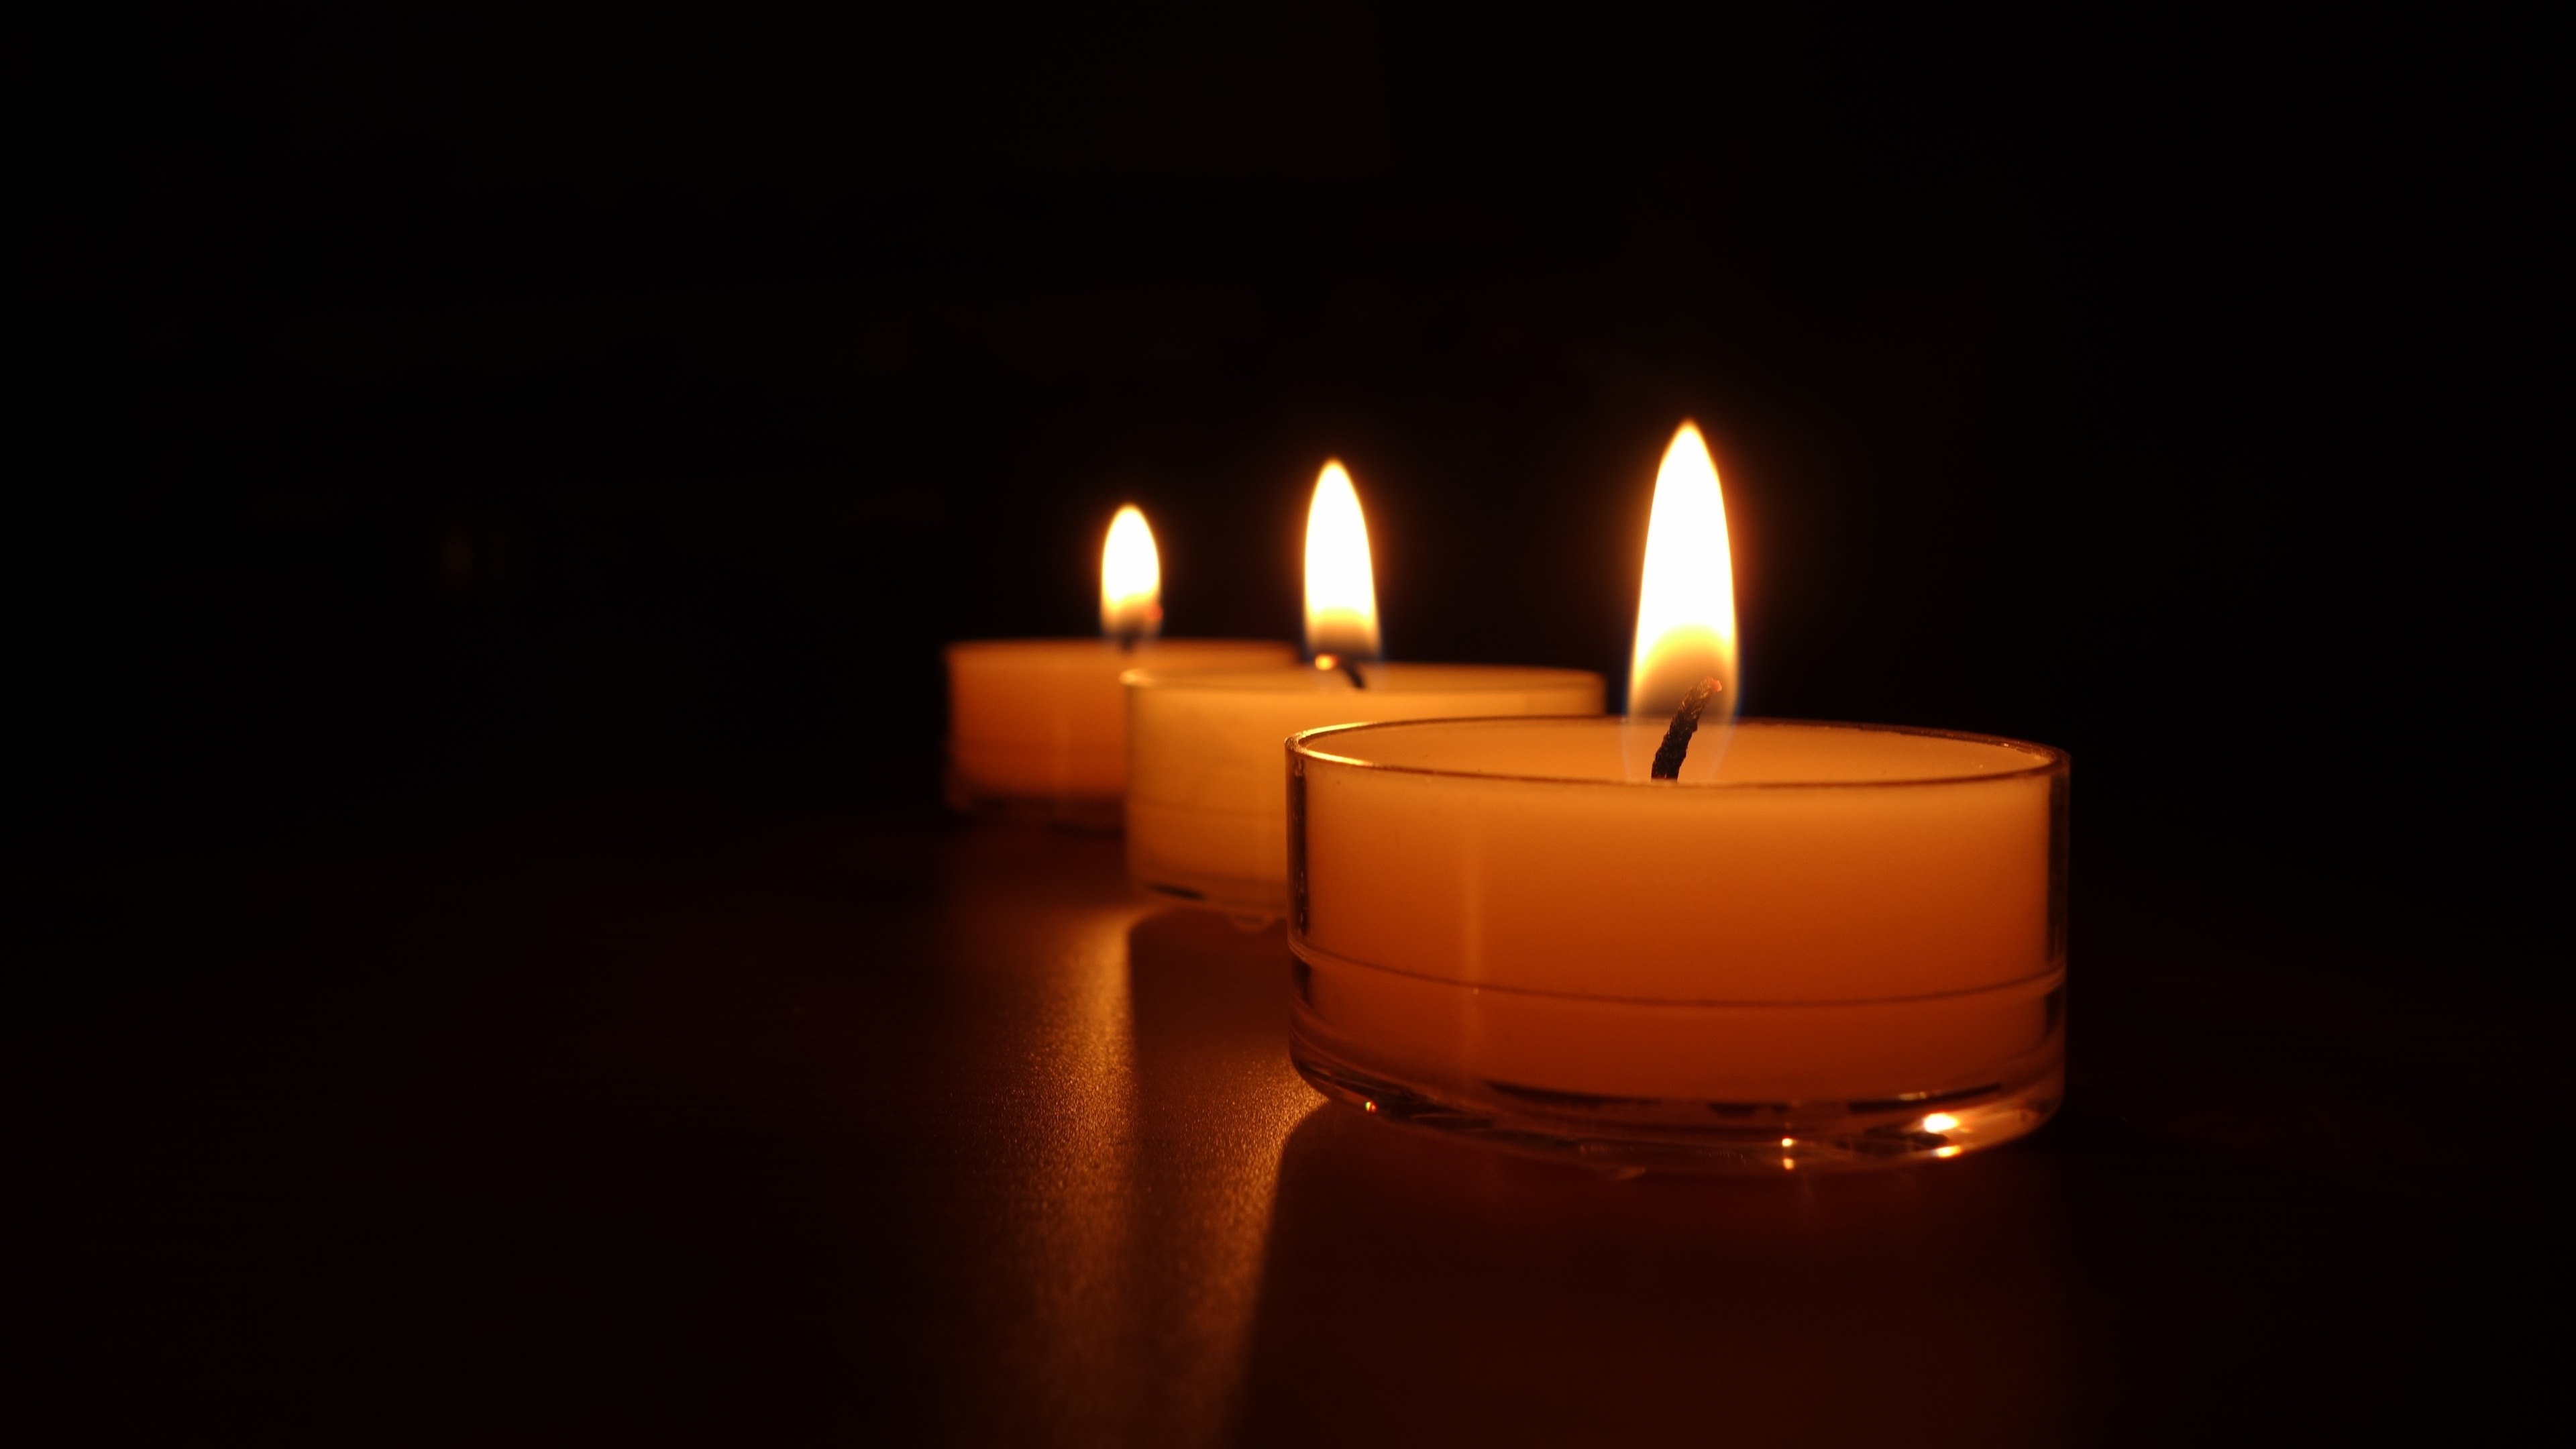 Candle flames, Flickering light, Intimate glow, Serene ambiance, Relaxing atmosphere, 3840x2160 4K Desktop